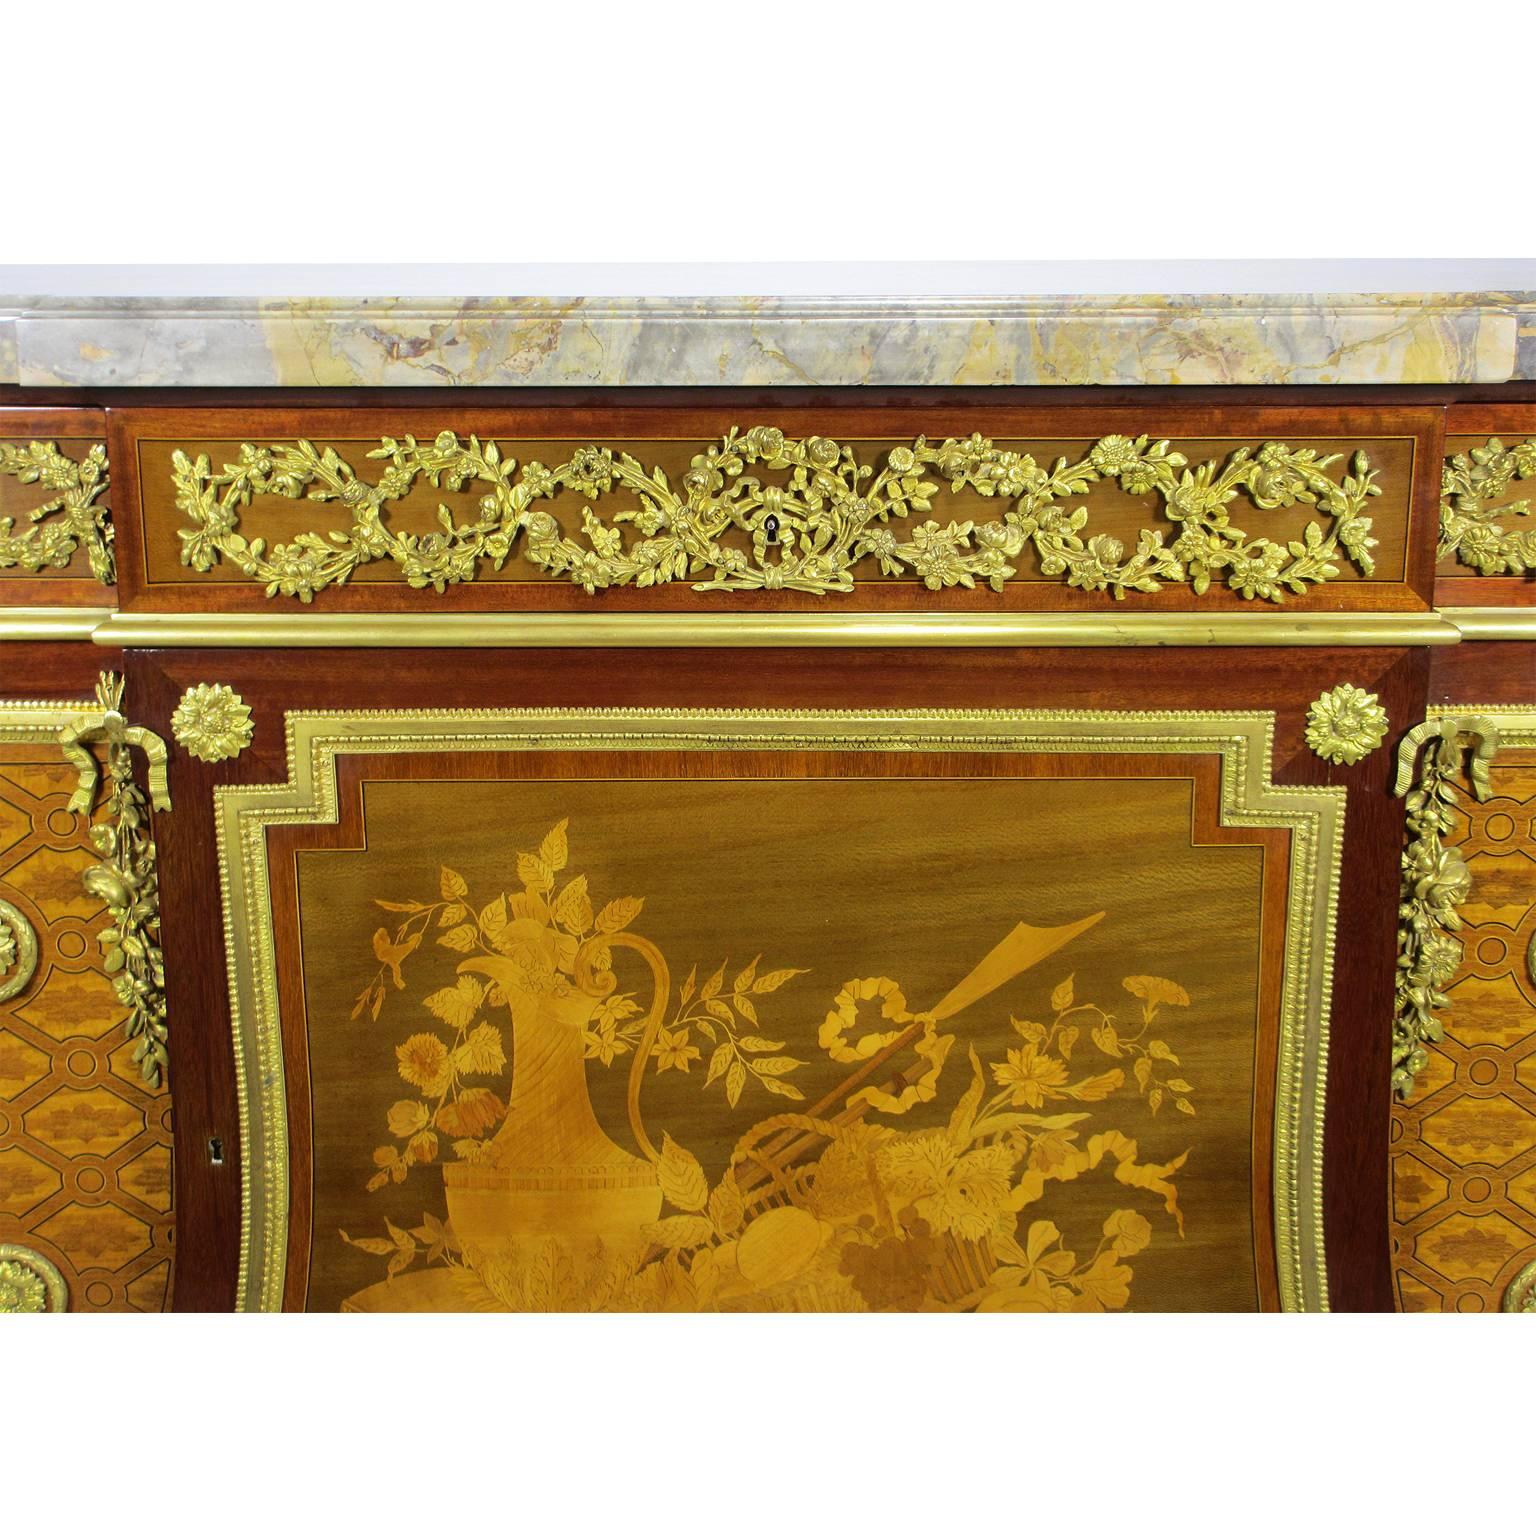 Fine French 19th Century Louis XVI Style Gilt-Bronze Mounted Marquetry Commode For Sale 3